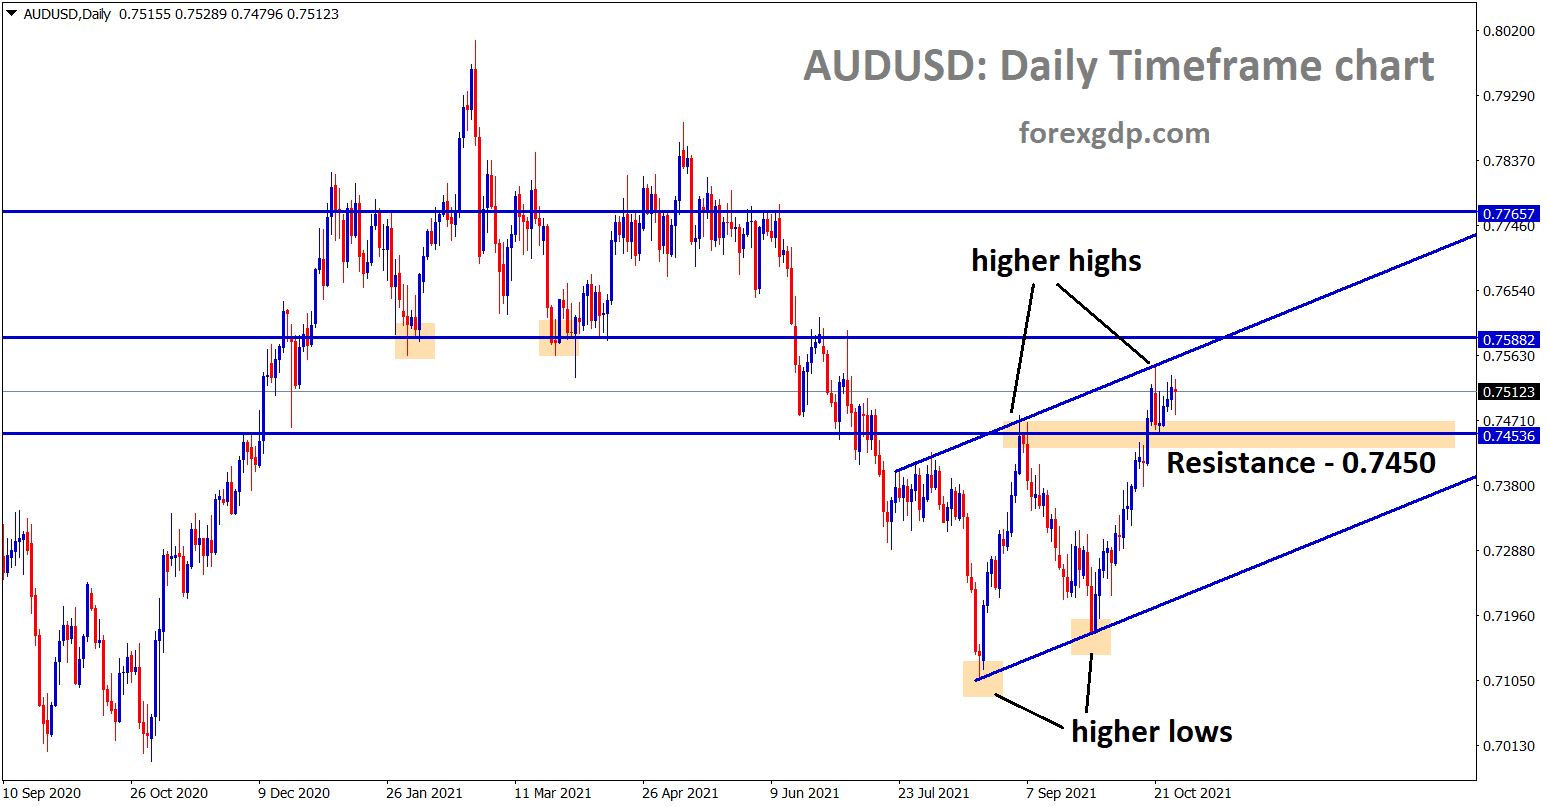 AUDUSD has broken the recent resistance 0.7450 and standing now at the higher high area of the ascending channel